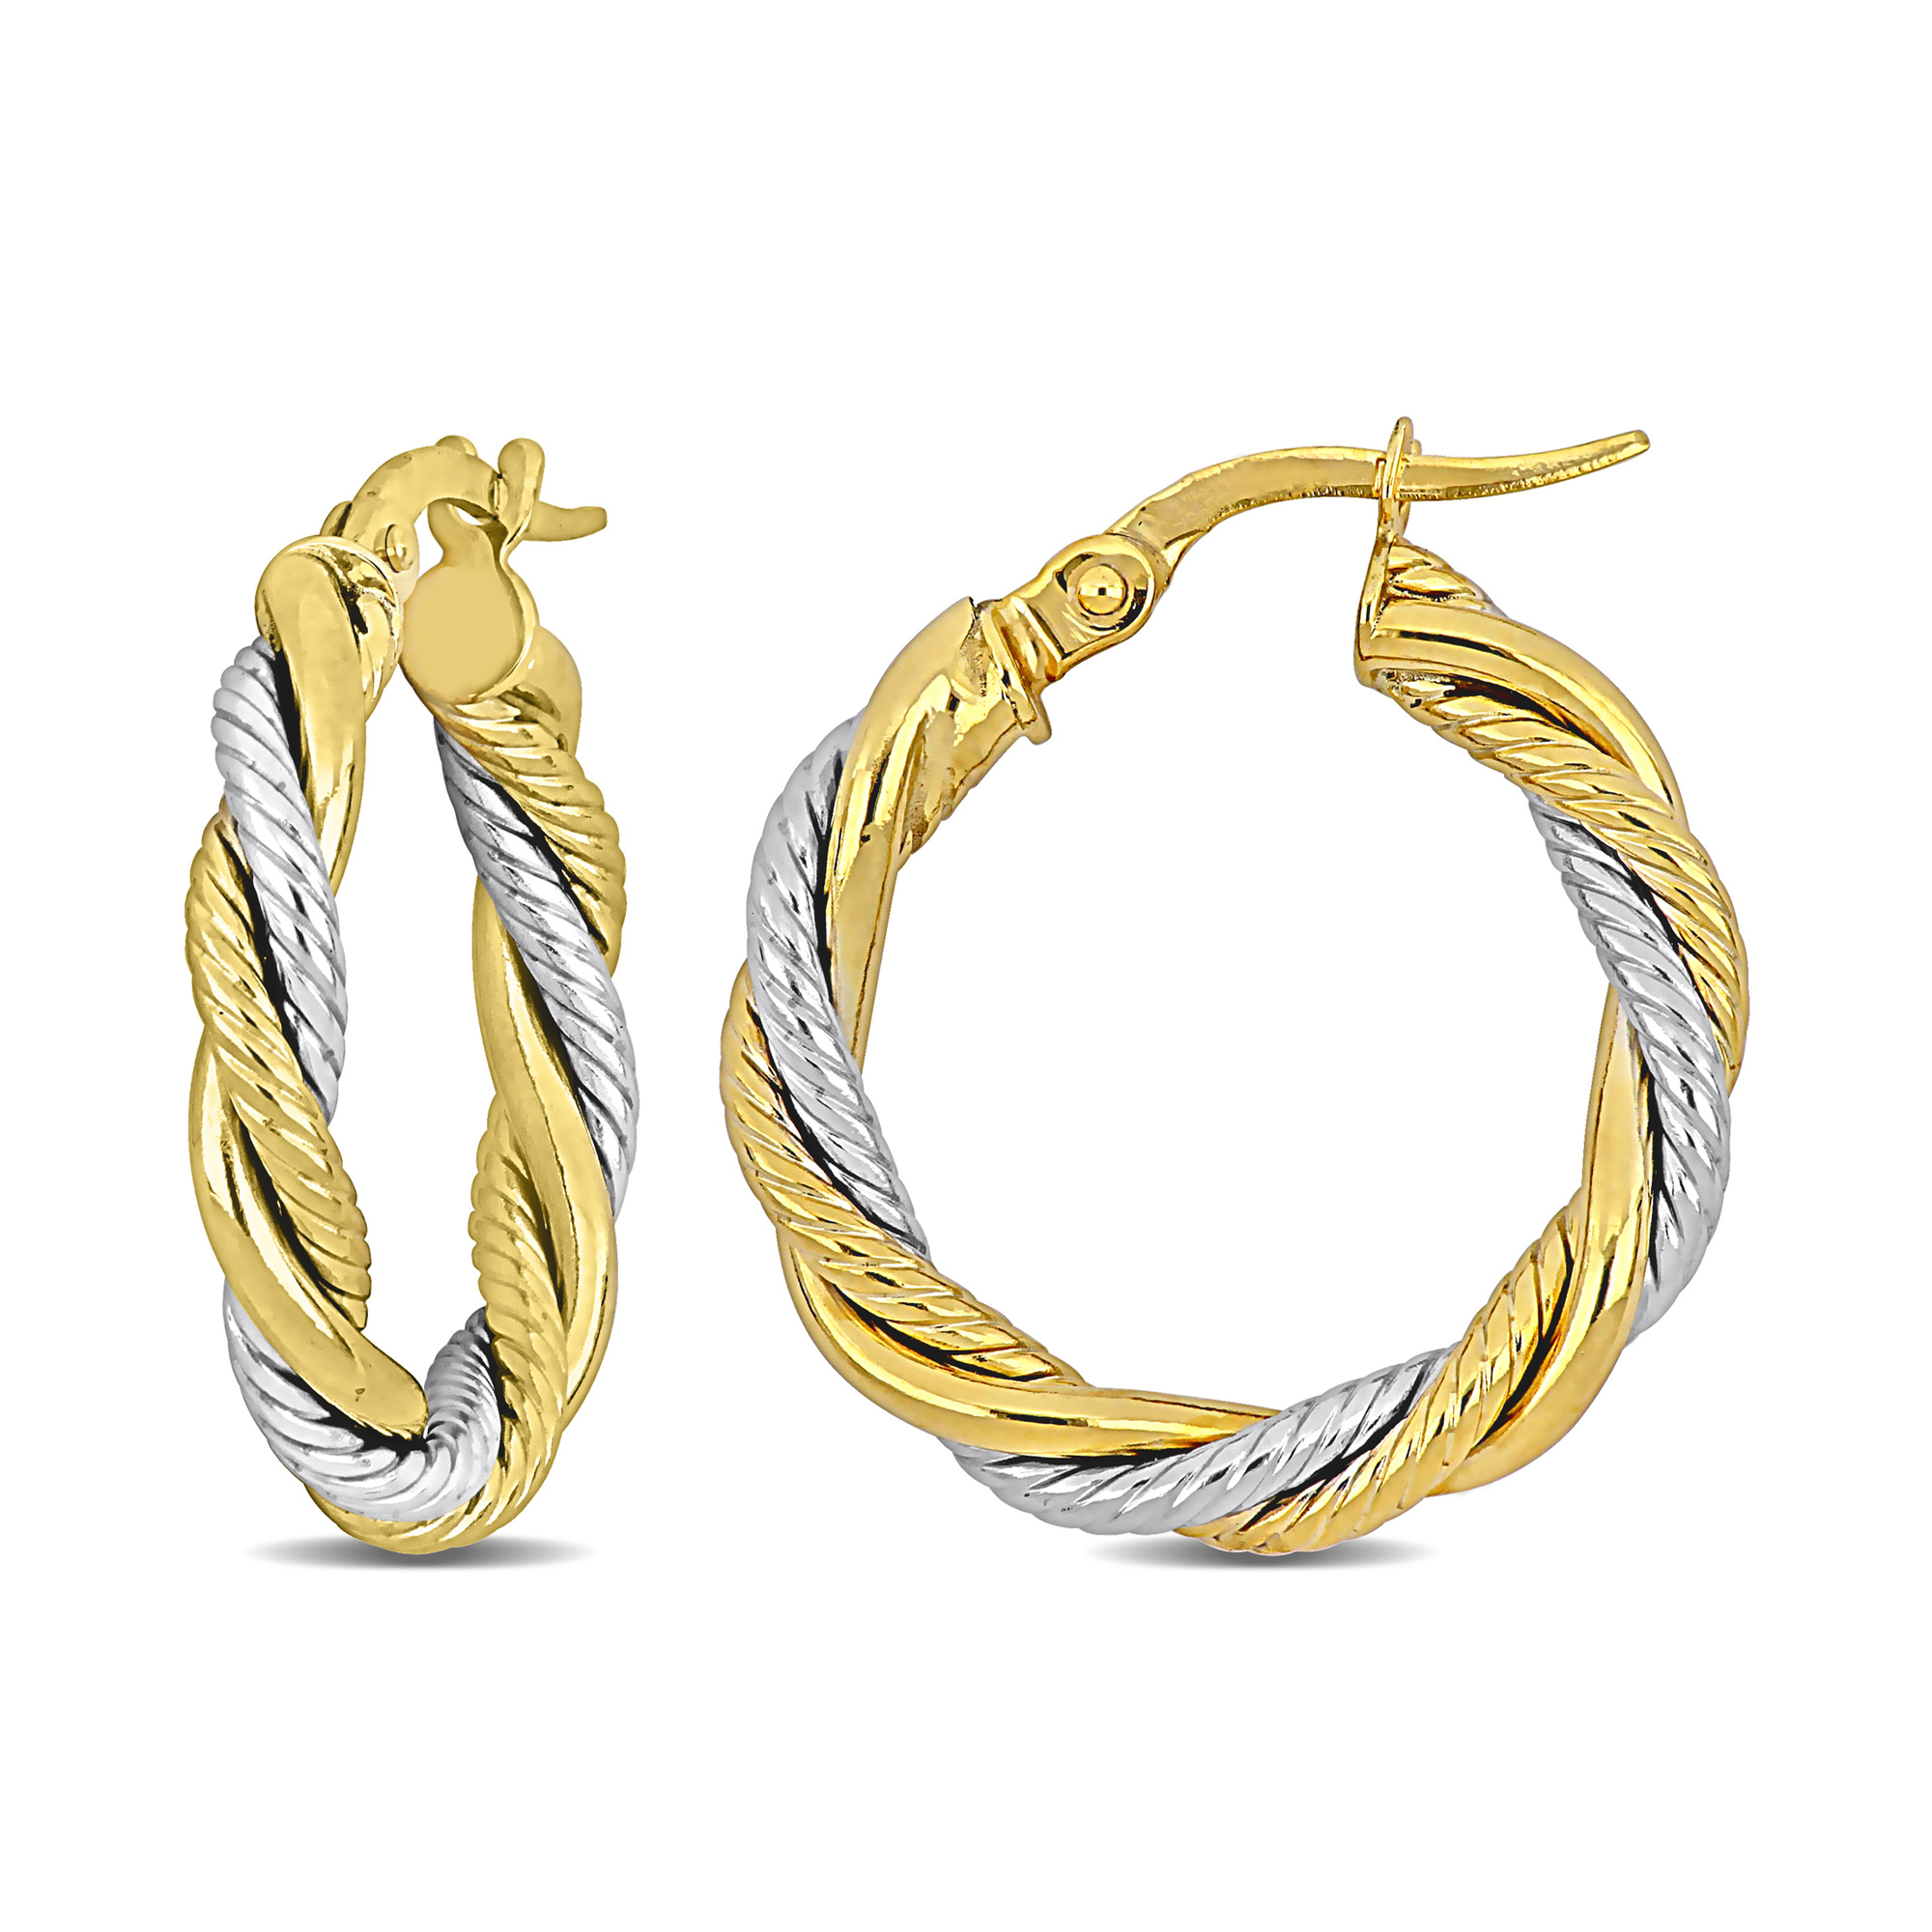 Two-Tone Yellow and White Gold Twisted Hoop Earrings | 20mm